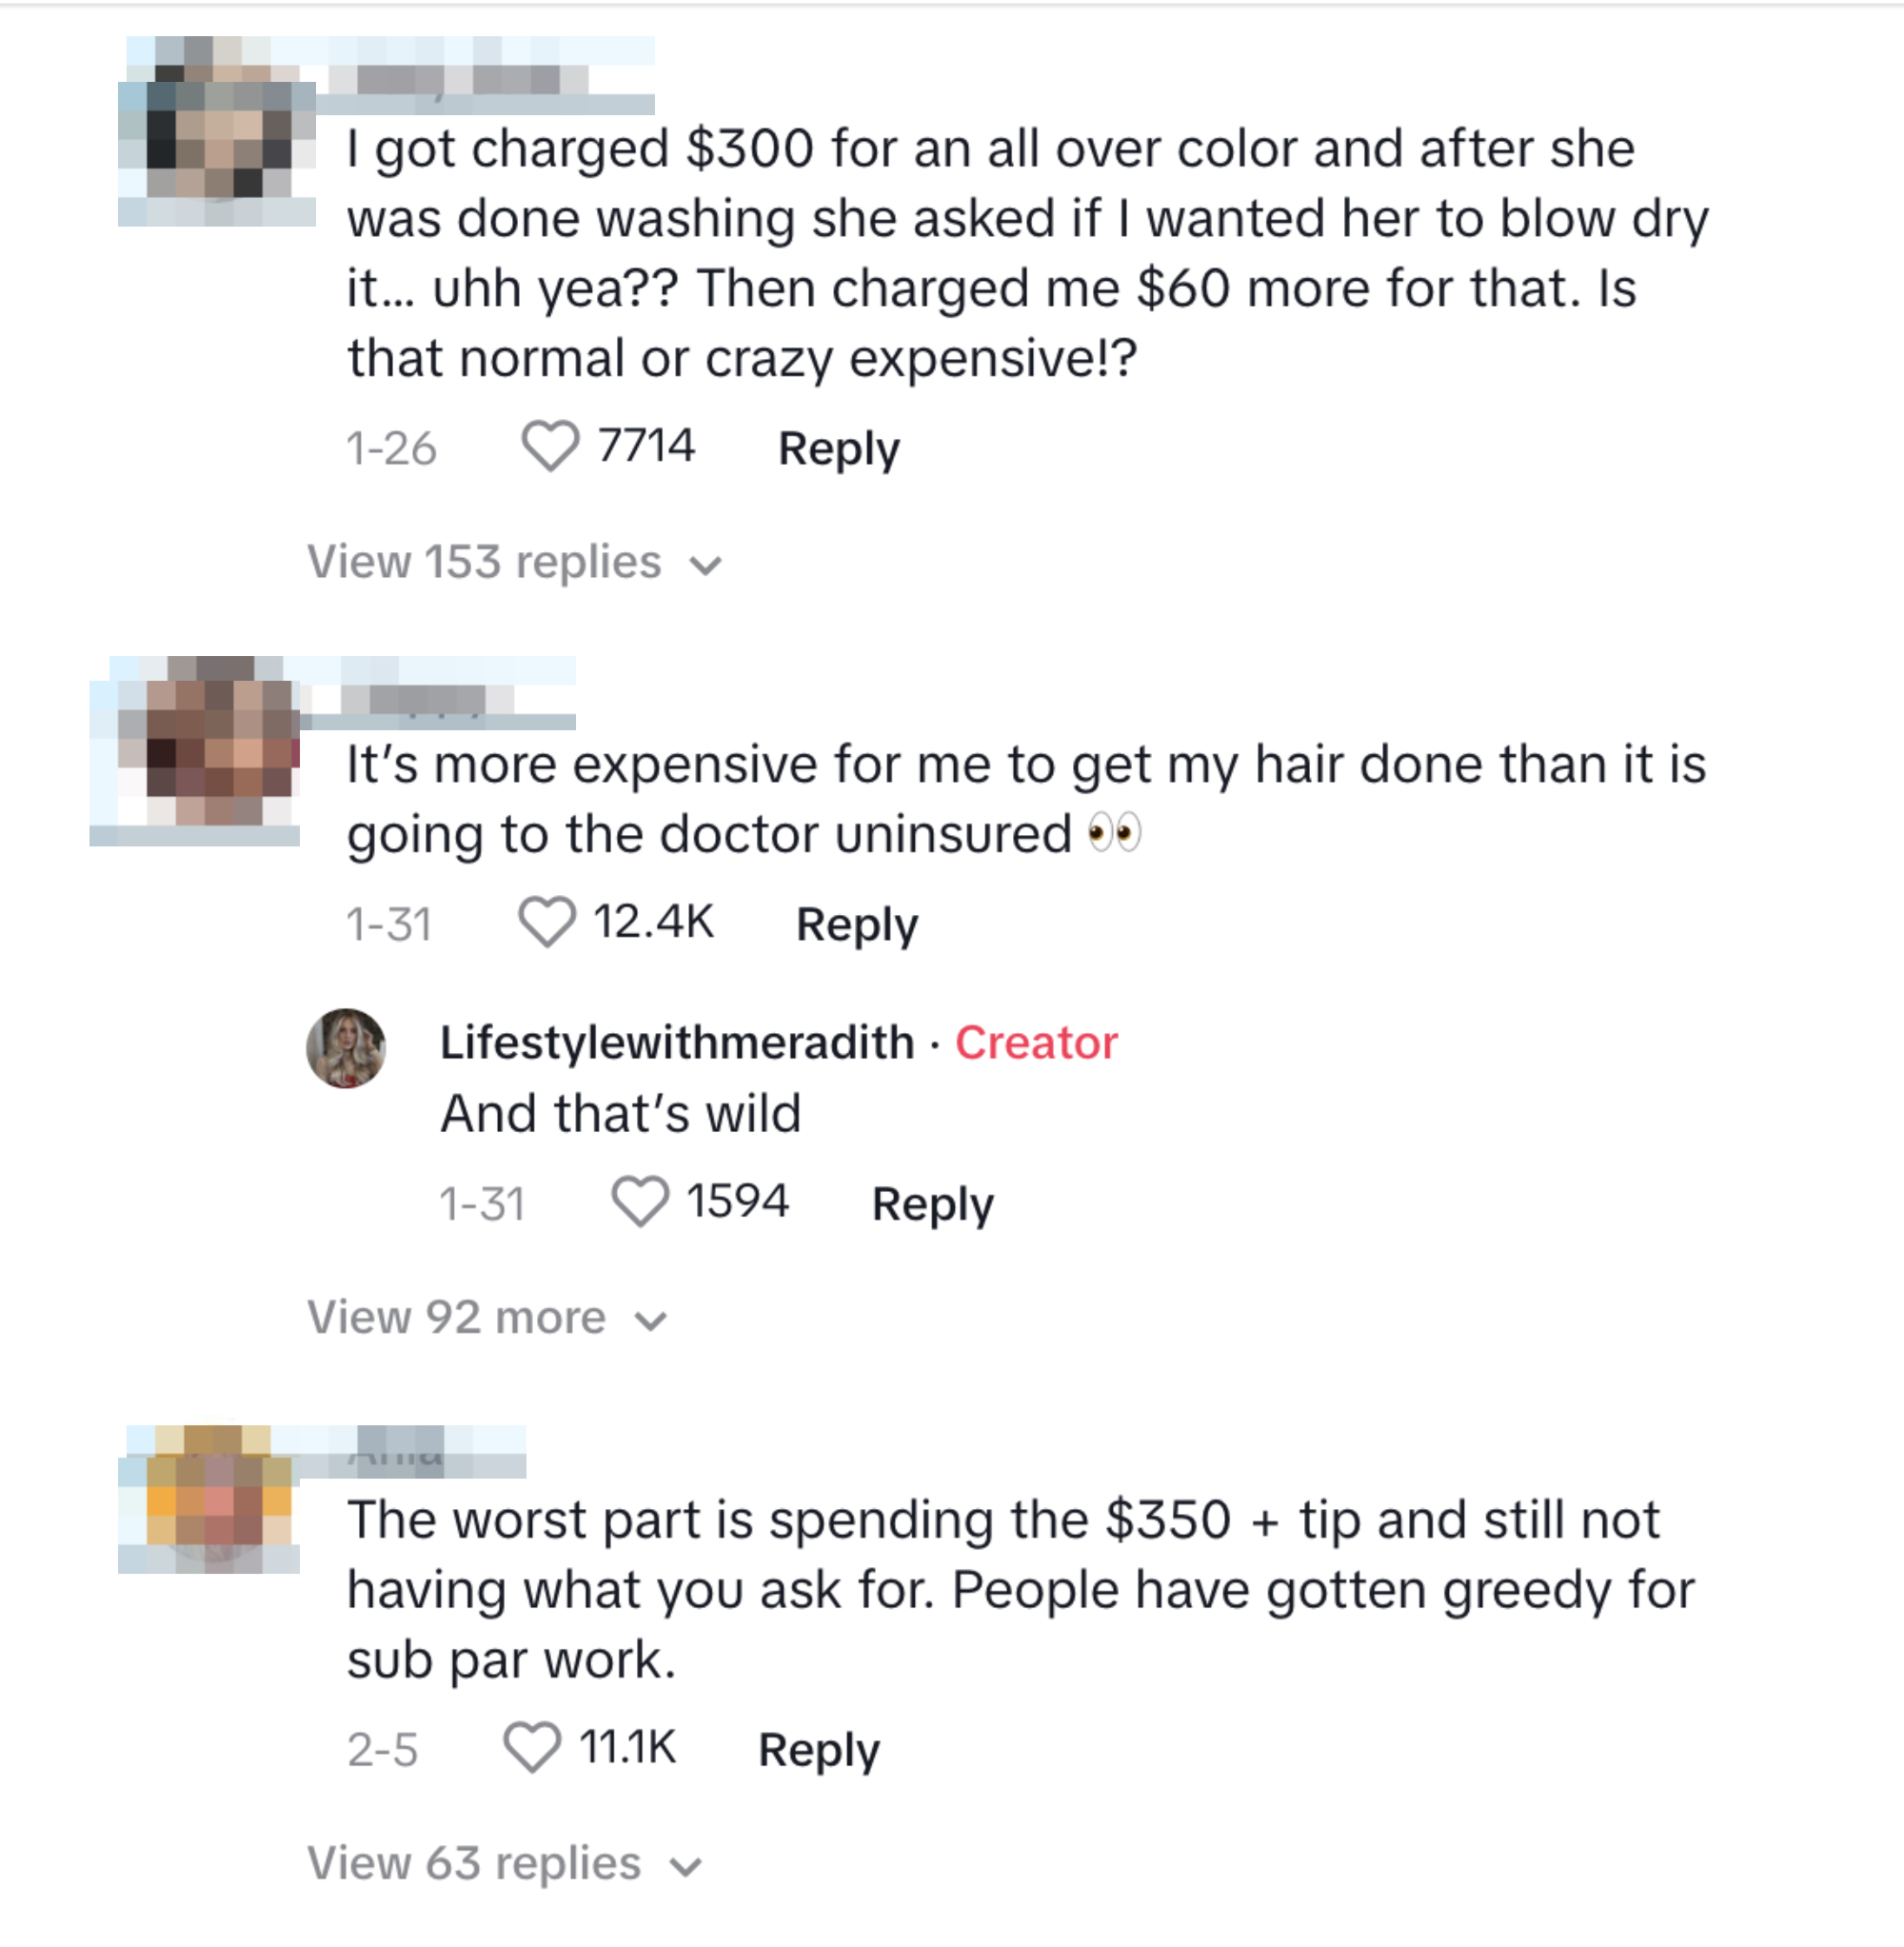 Three screenshots of social media comments discussing the high cost of hair services